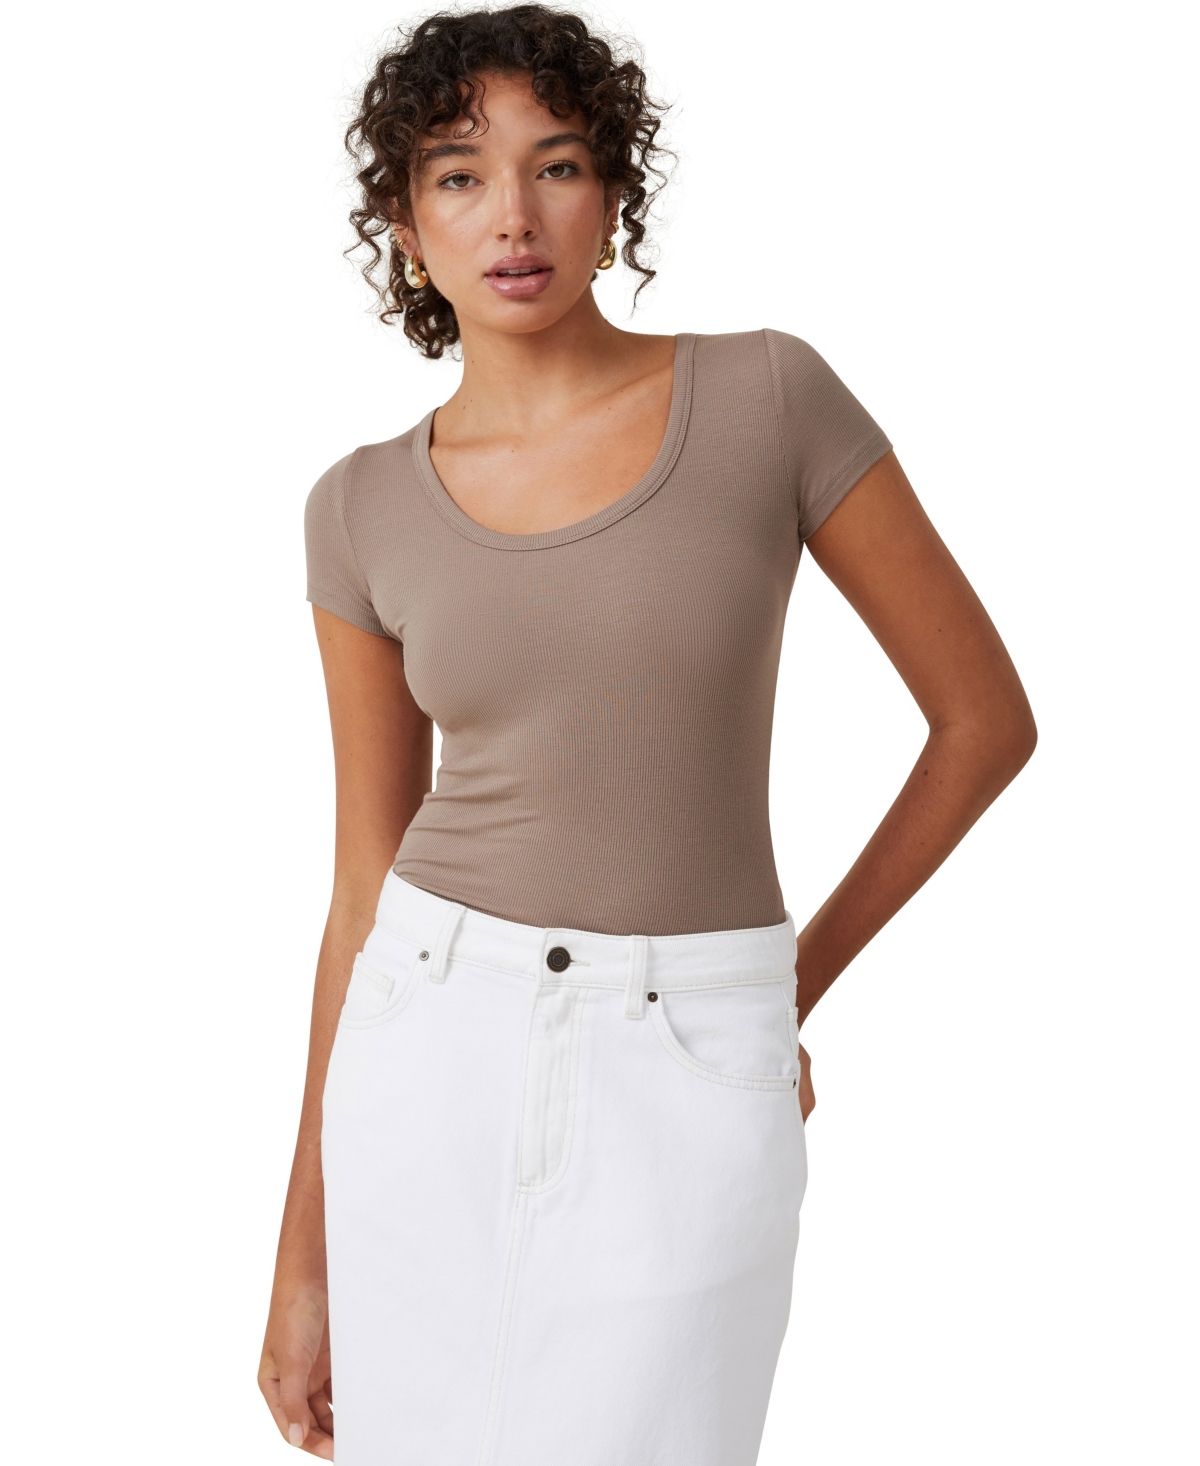 Women's Staple Rib Scoop Neck Short Sleeve Top - Rich Taupe